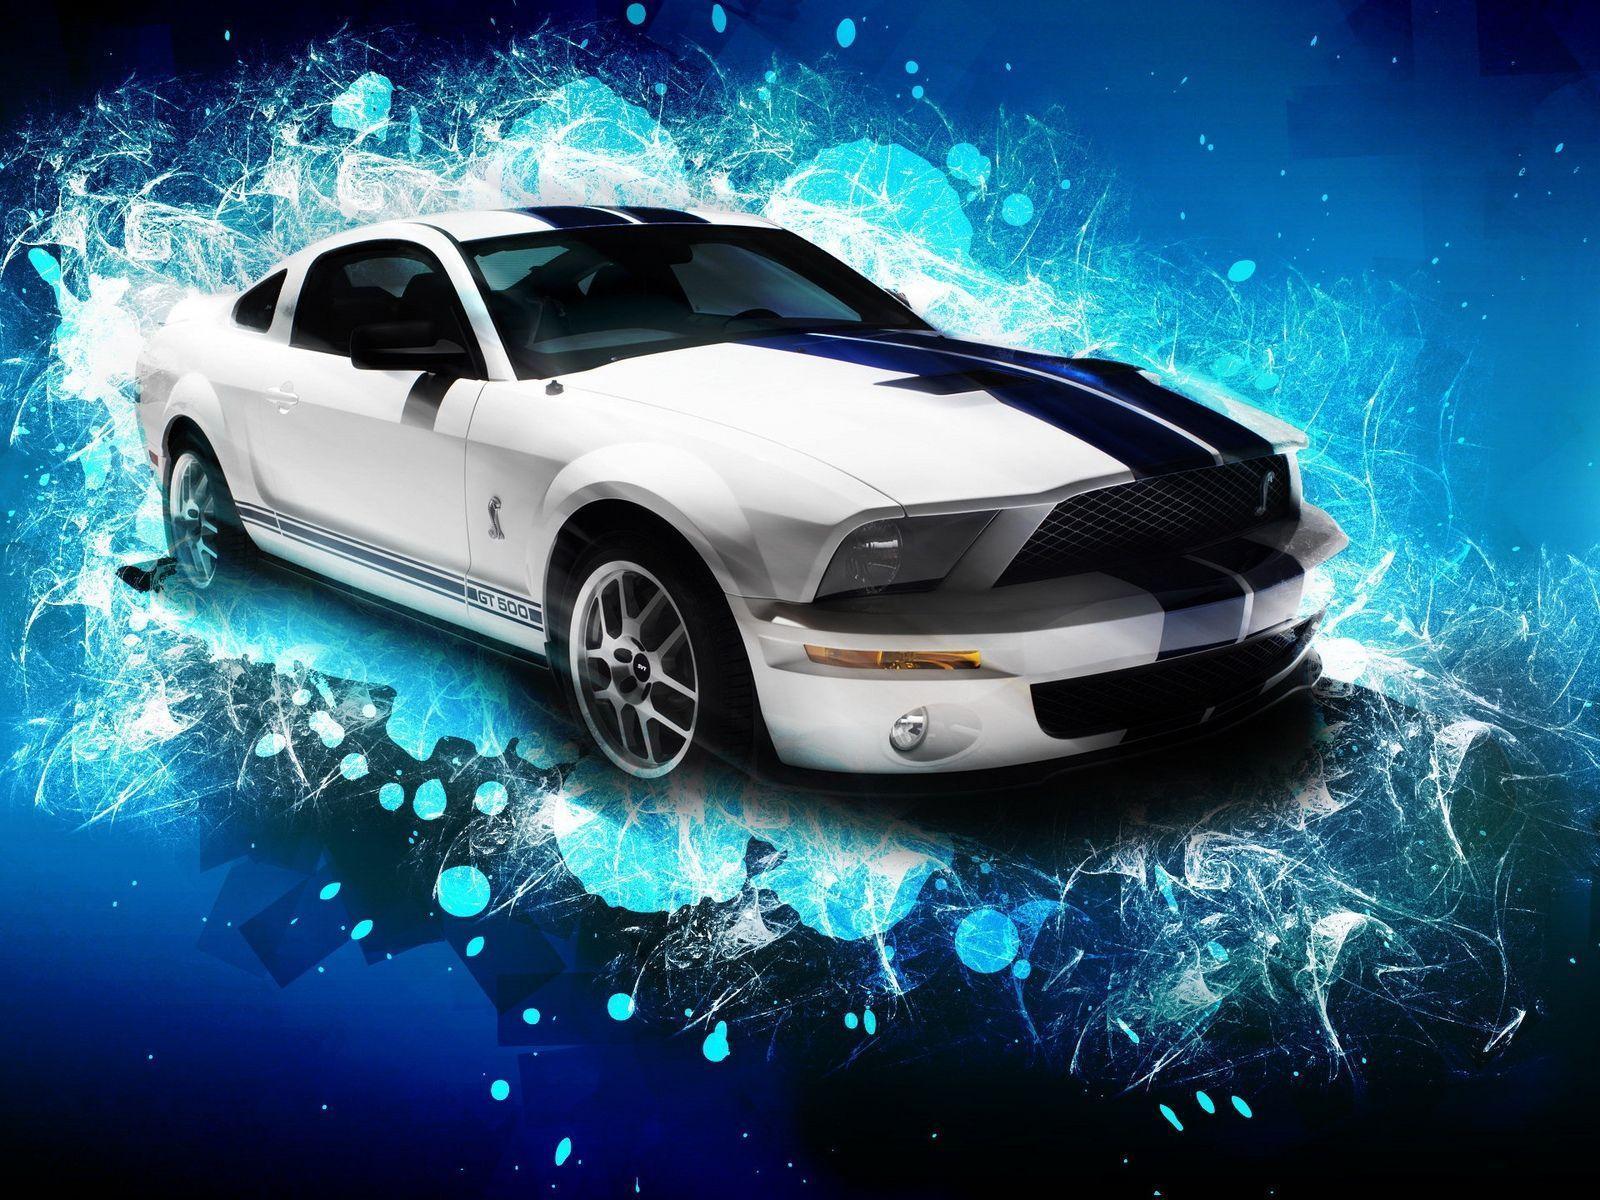 image For > Cool 3D Wallpaper Cars